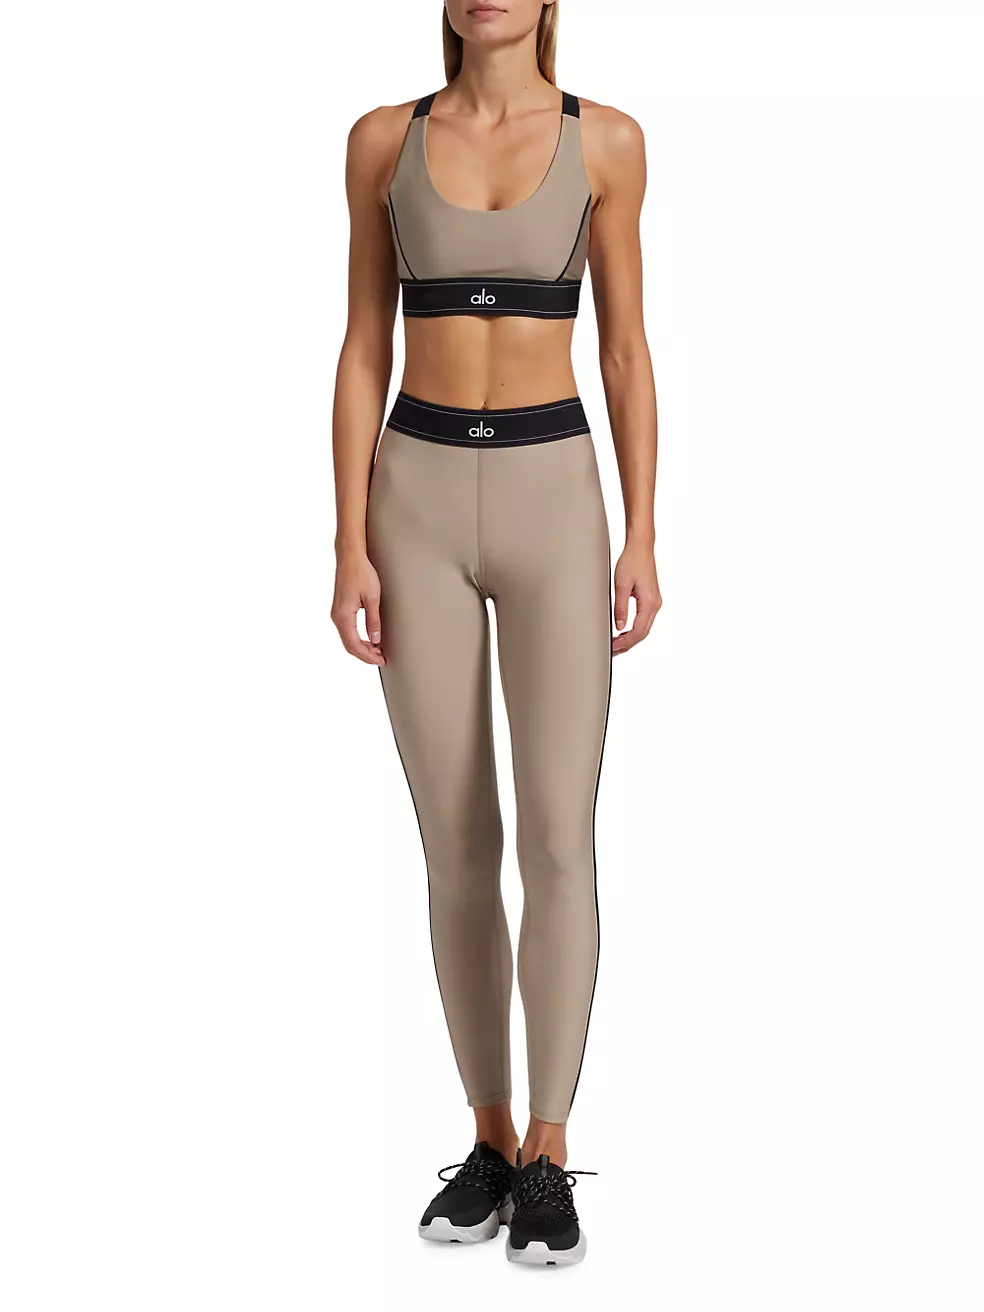 ALO Yoga, Pants & Jumpsuits, Alo Yoga Suit Up Set Both Leggings And Bra  In Gravel And Black Both Size Small